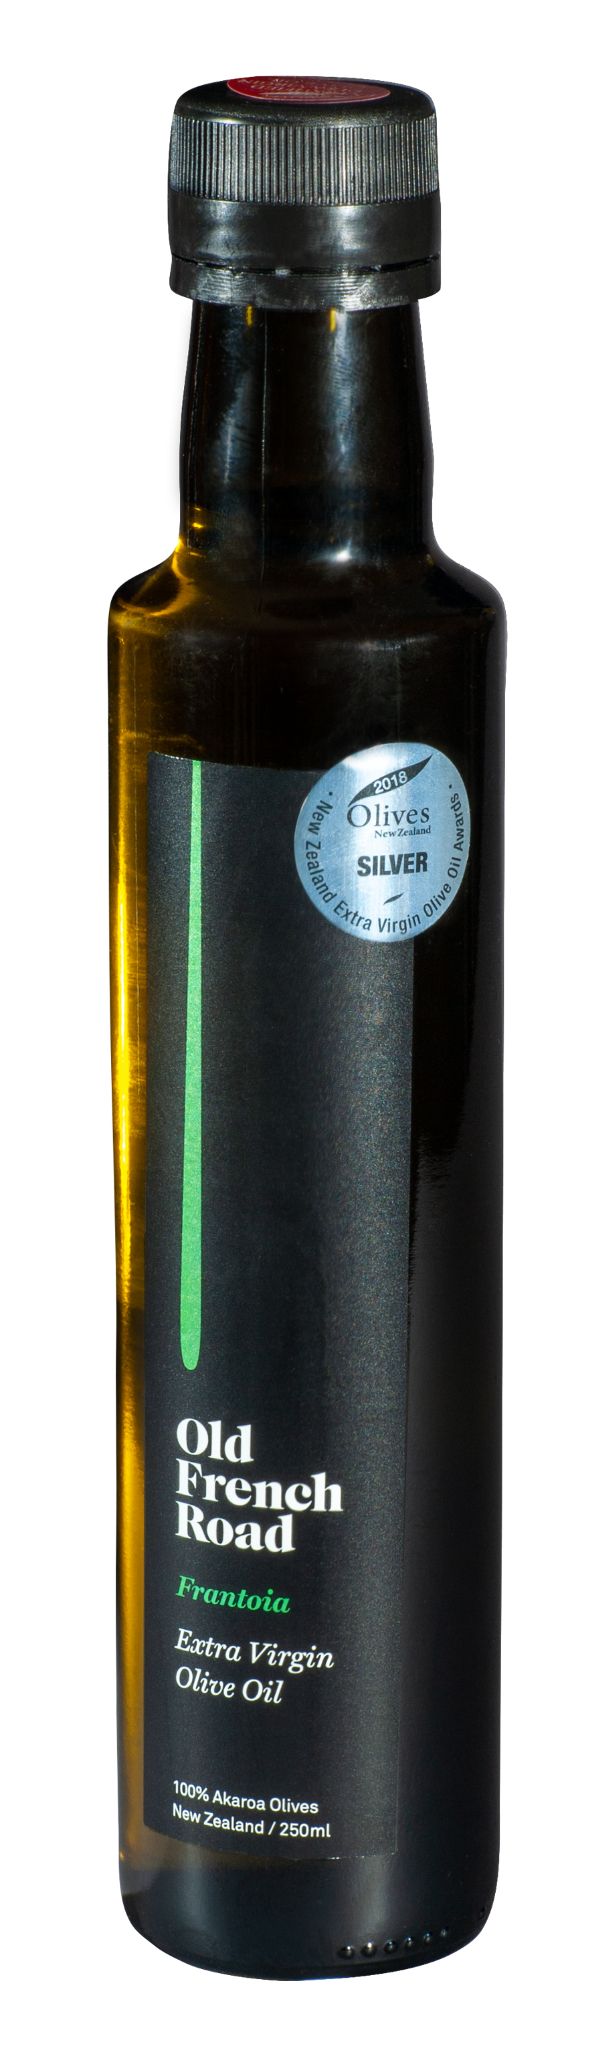 Old French Road Frantoia Extra Virgin Olive Oil 500mL